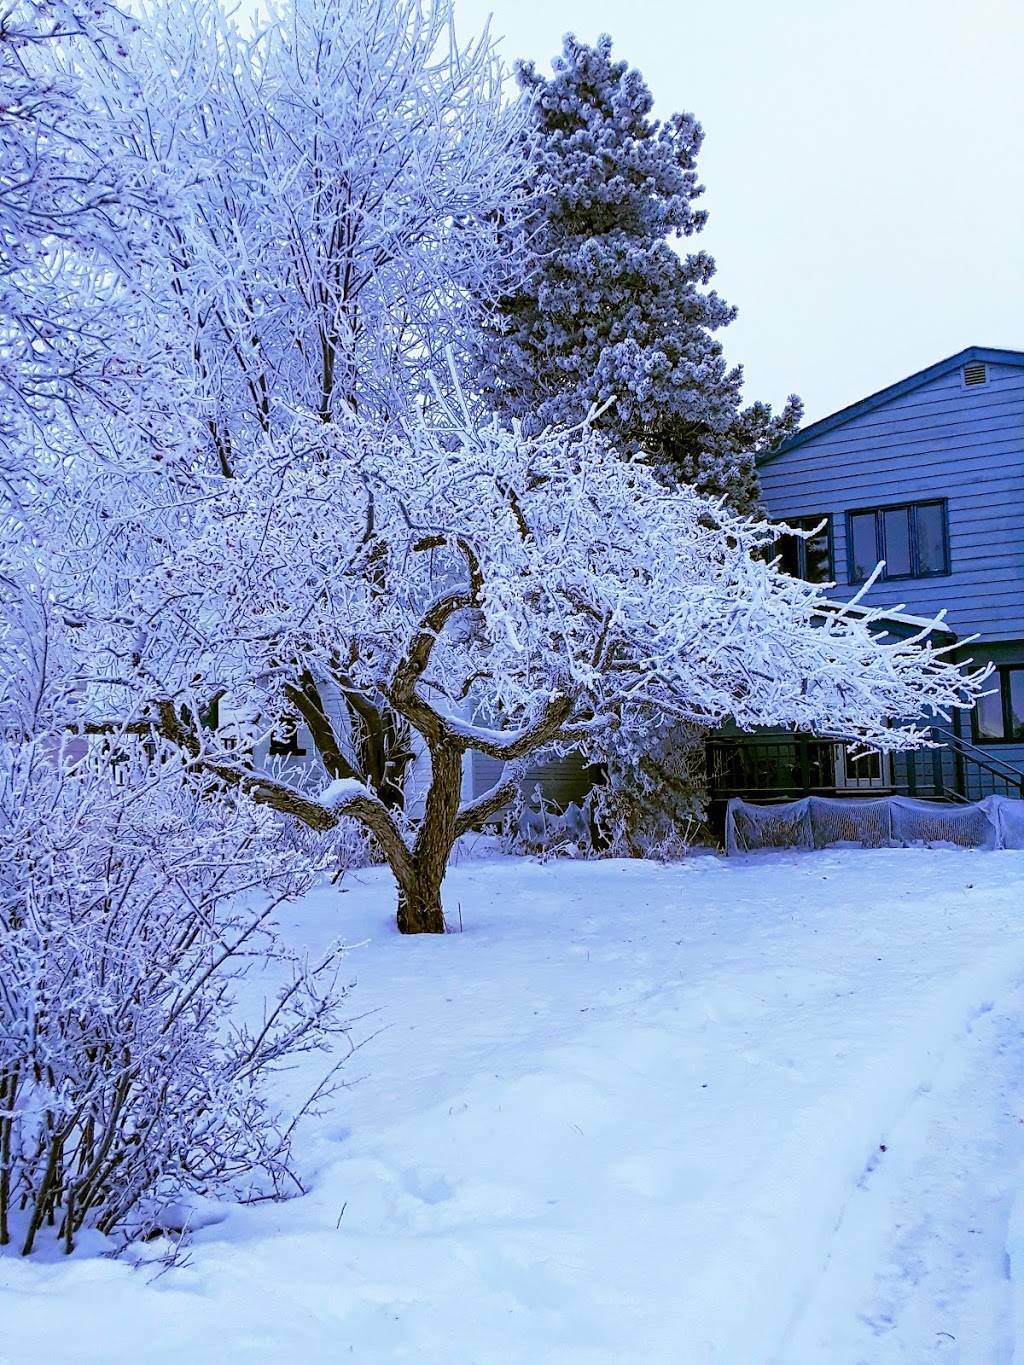 City Garden Bed & Breakfast | 1352 W 10th Ave, Anchorage, AK 99501 | Phone: (907) 276-8686